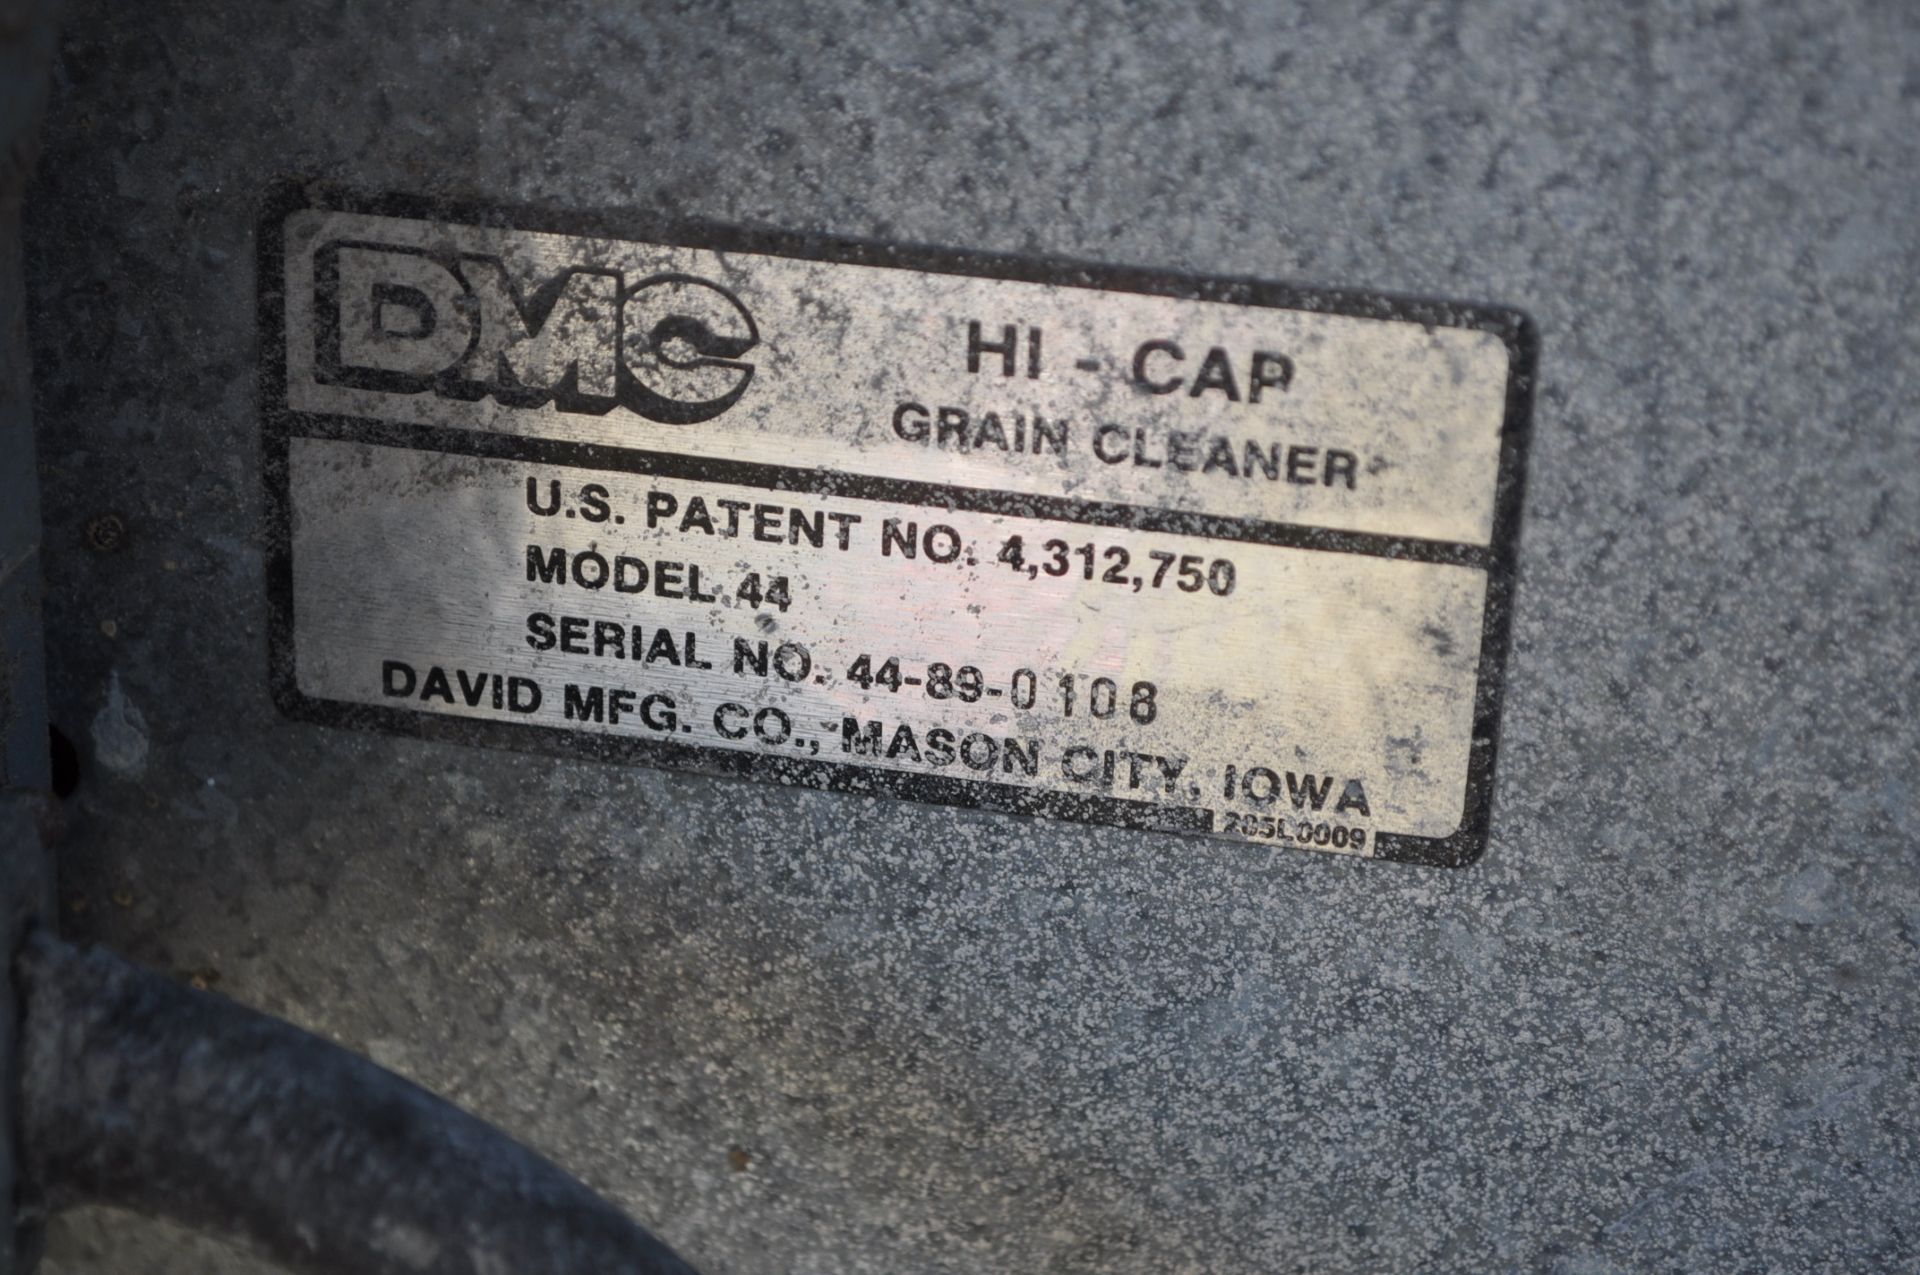 HY-CAPP #44 rotary grain cleaner, 220V electric - Image 5 of 5